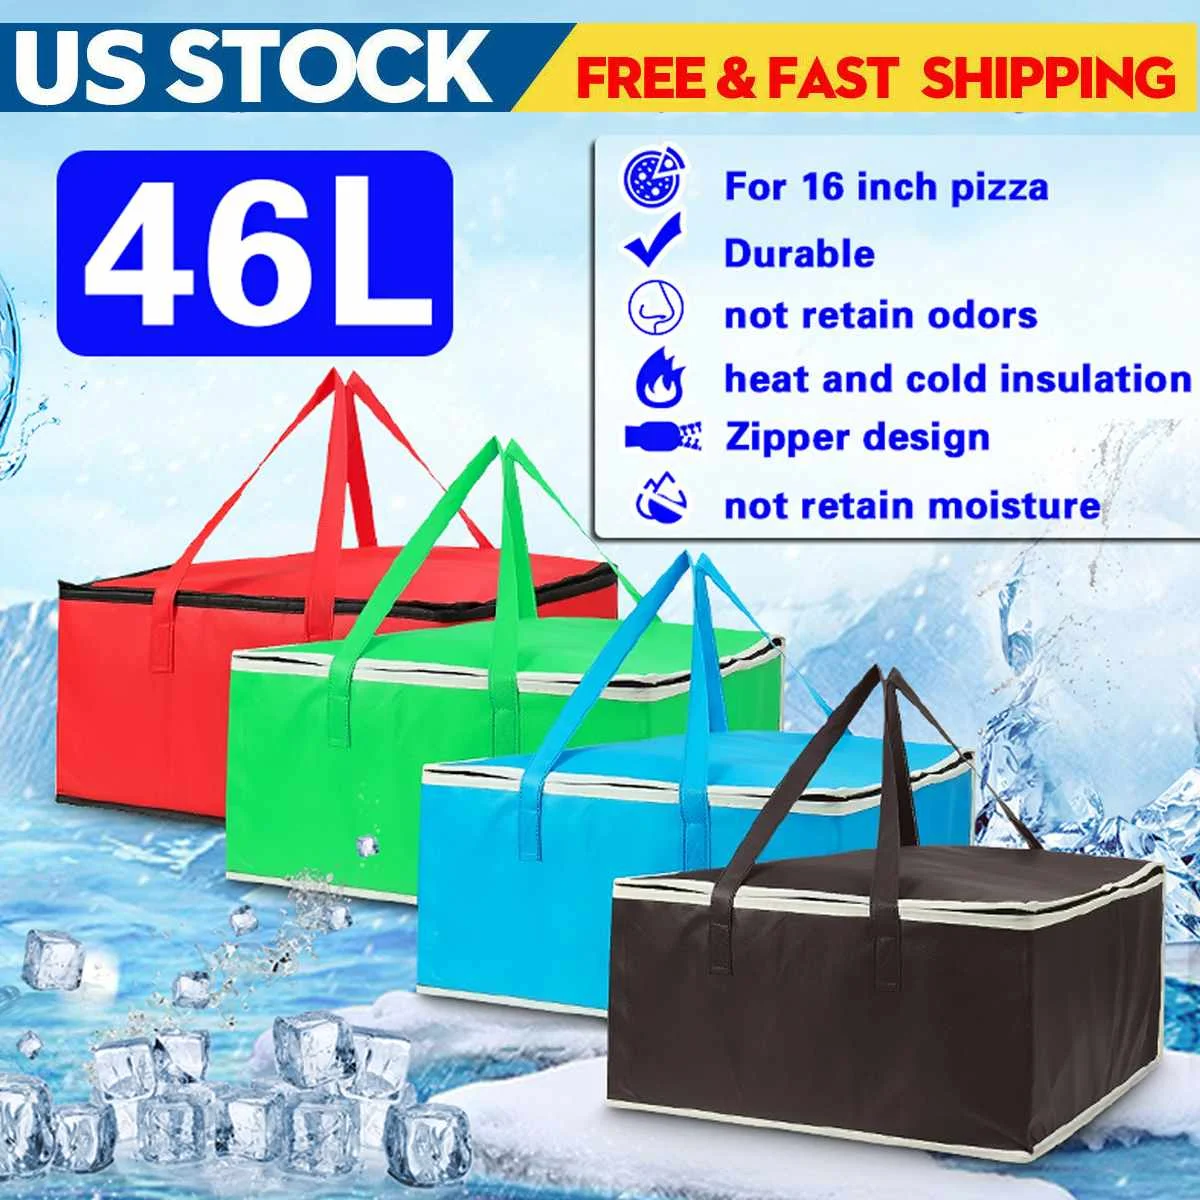 

15" 16" Insulated Pizza Delivery Bag Cooler Bag Waterproof Insulation Folding Picnic Portable Ice Pack Food Thermal Bag Food Bag